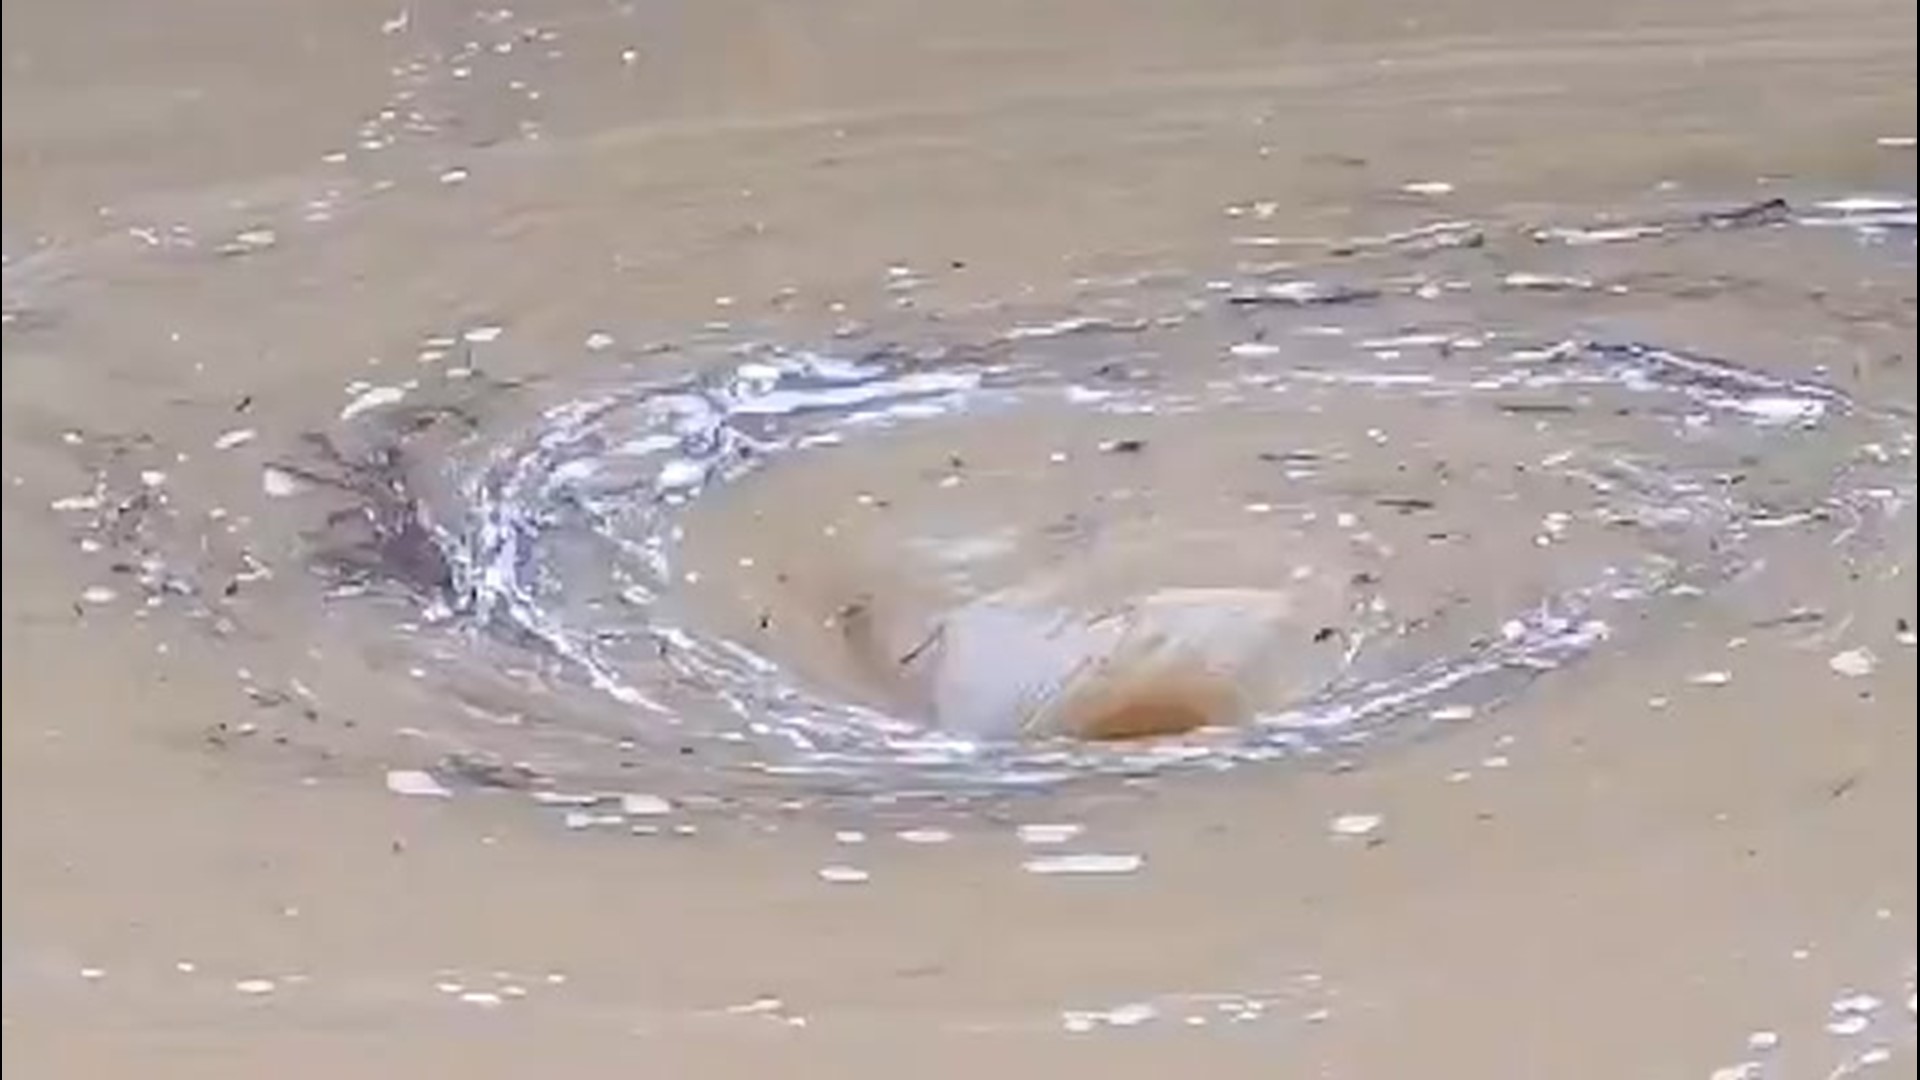 Flash flooding caused a small whirlpool to form in this flooded front yard in Richmond, Virginia, on Aug. 15.